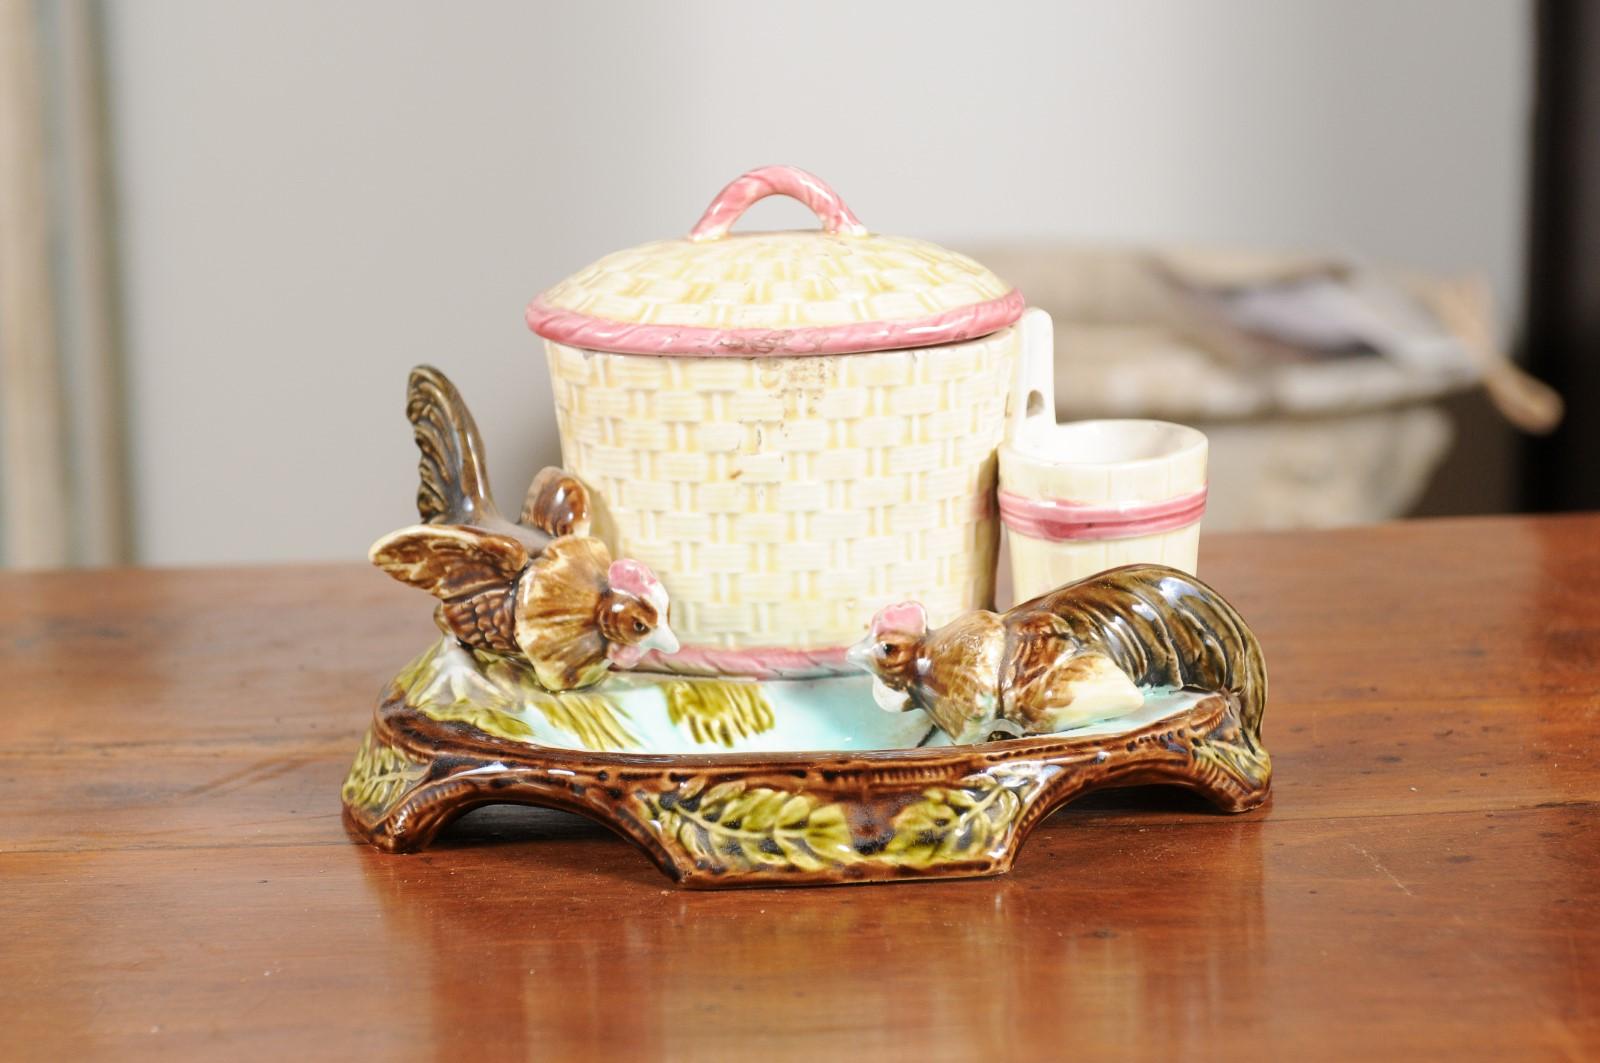 An Austrian Eichwald majolica humidor tobacco jar from the late 19th century, with petite roosters pecking the ground. Created in Austria during the third quarter of the 19th century, this lovely tobacco jar called a humidor features a central